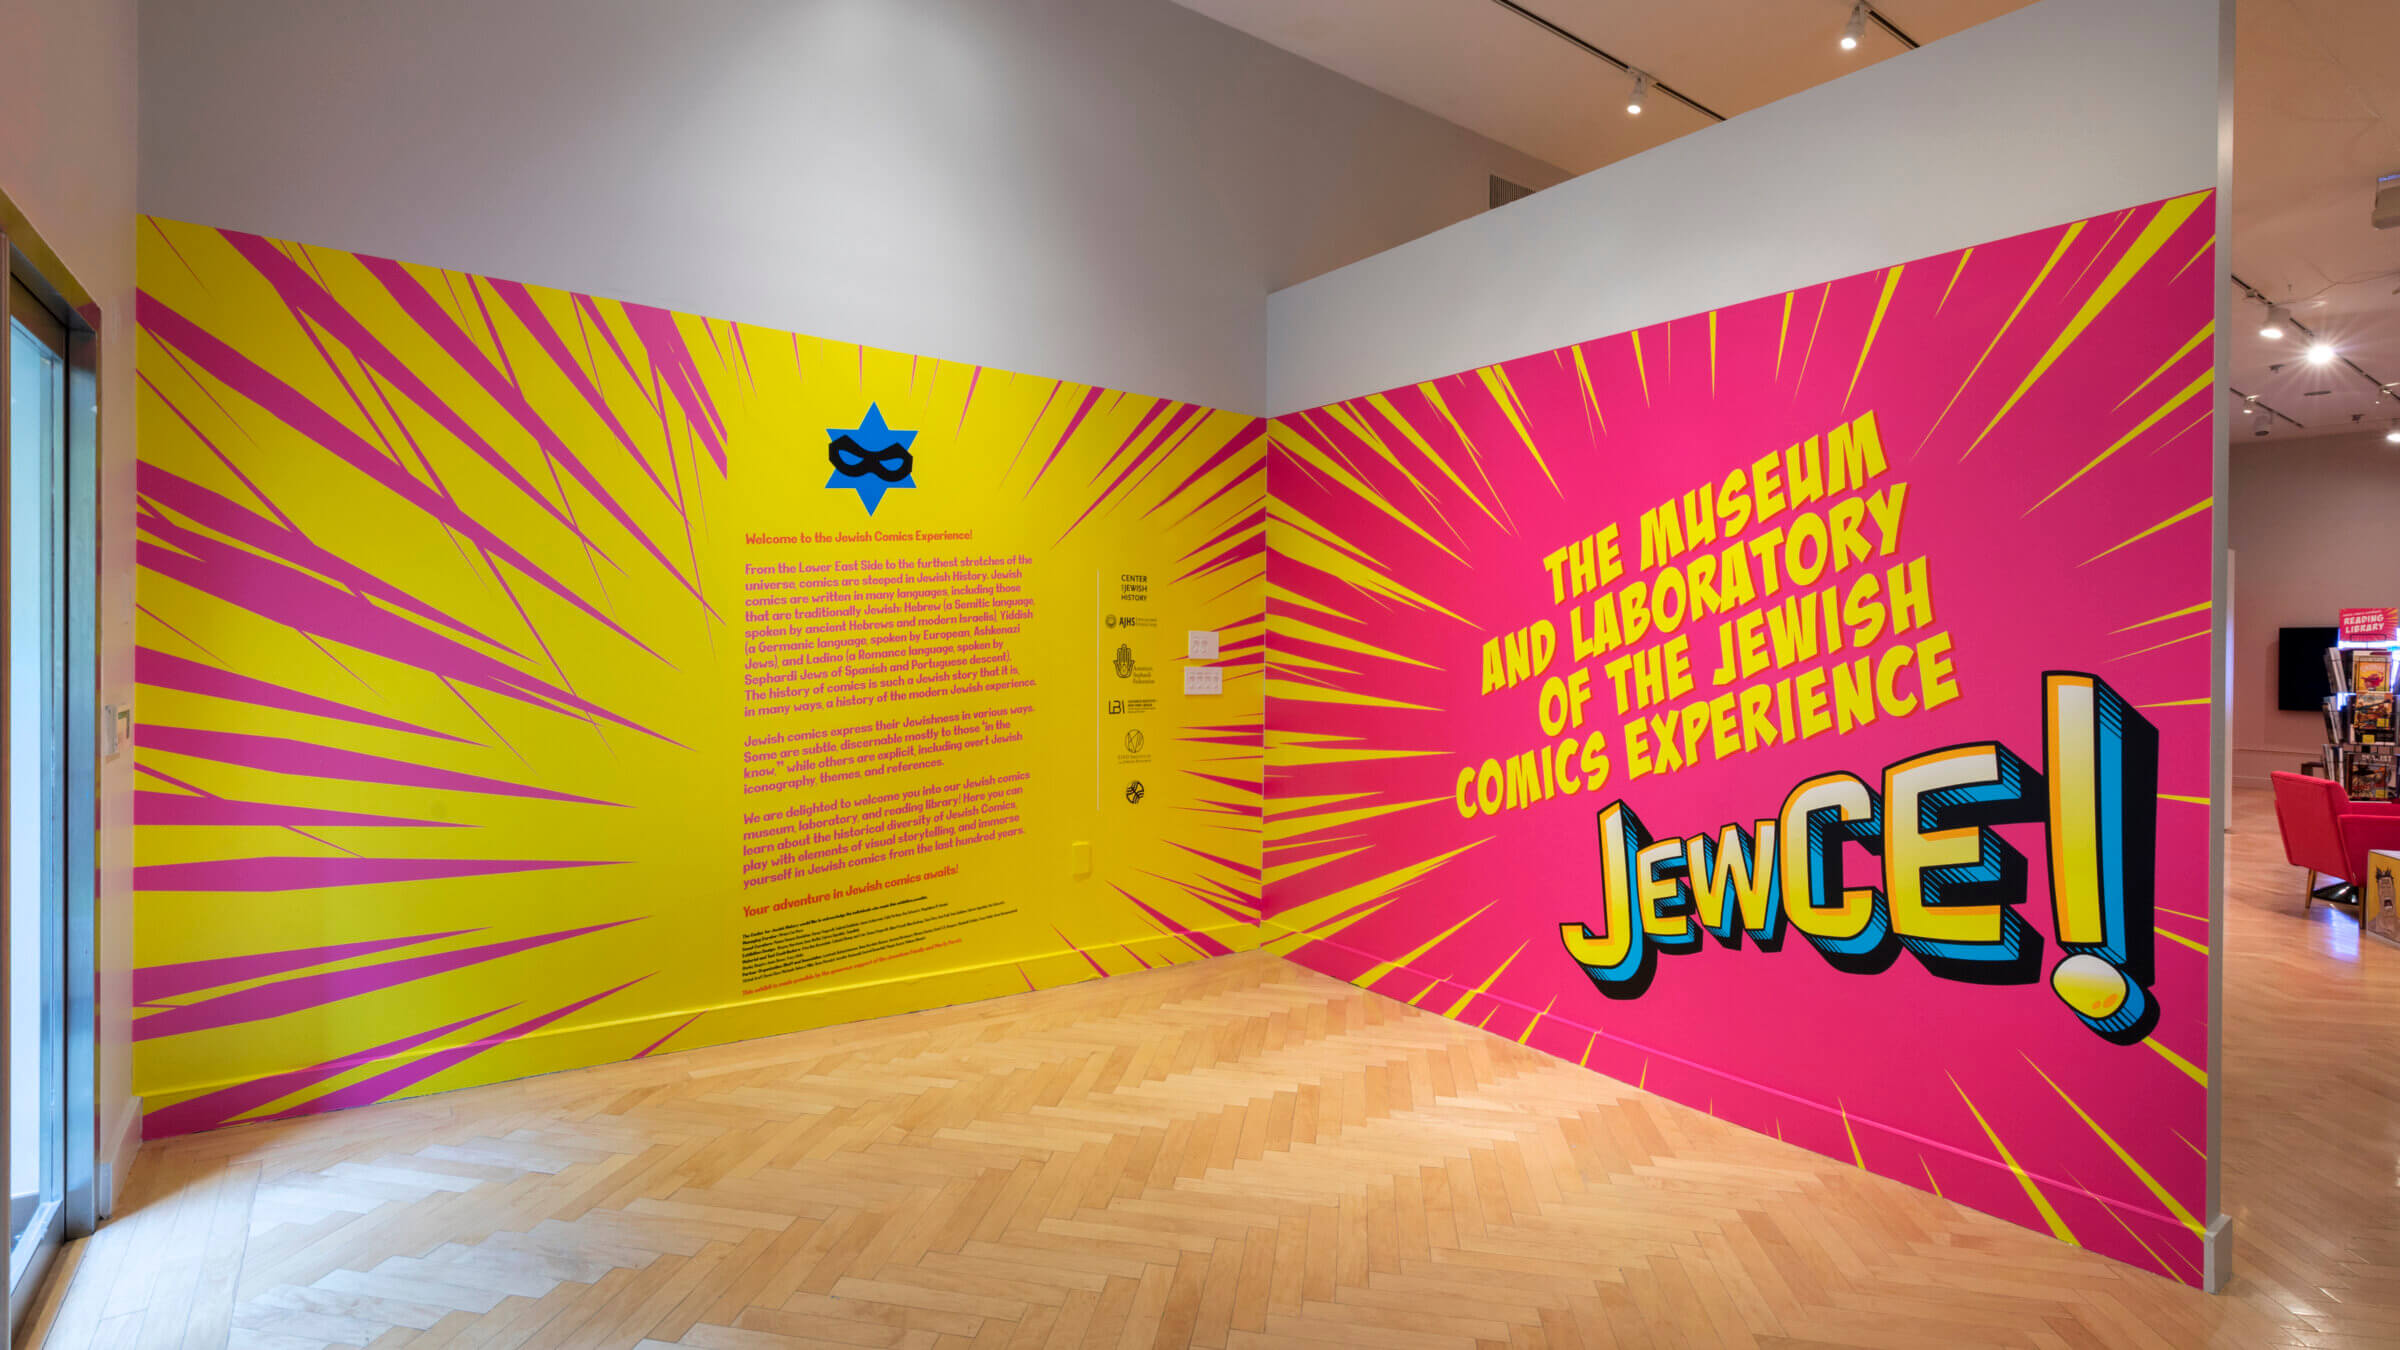 Jewce, at the Center for Jewish History, delvers into the Jewish origins of the comic book industry, and also explores the evolution of Jewish themes in comics, as well as the Jewish response to fascism and intolerance.